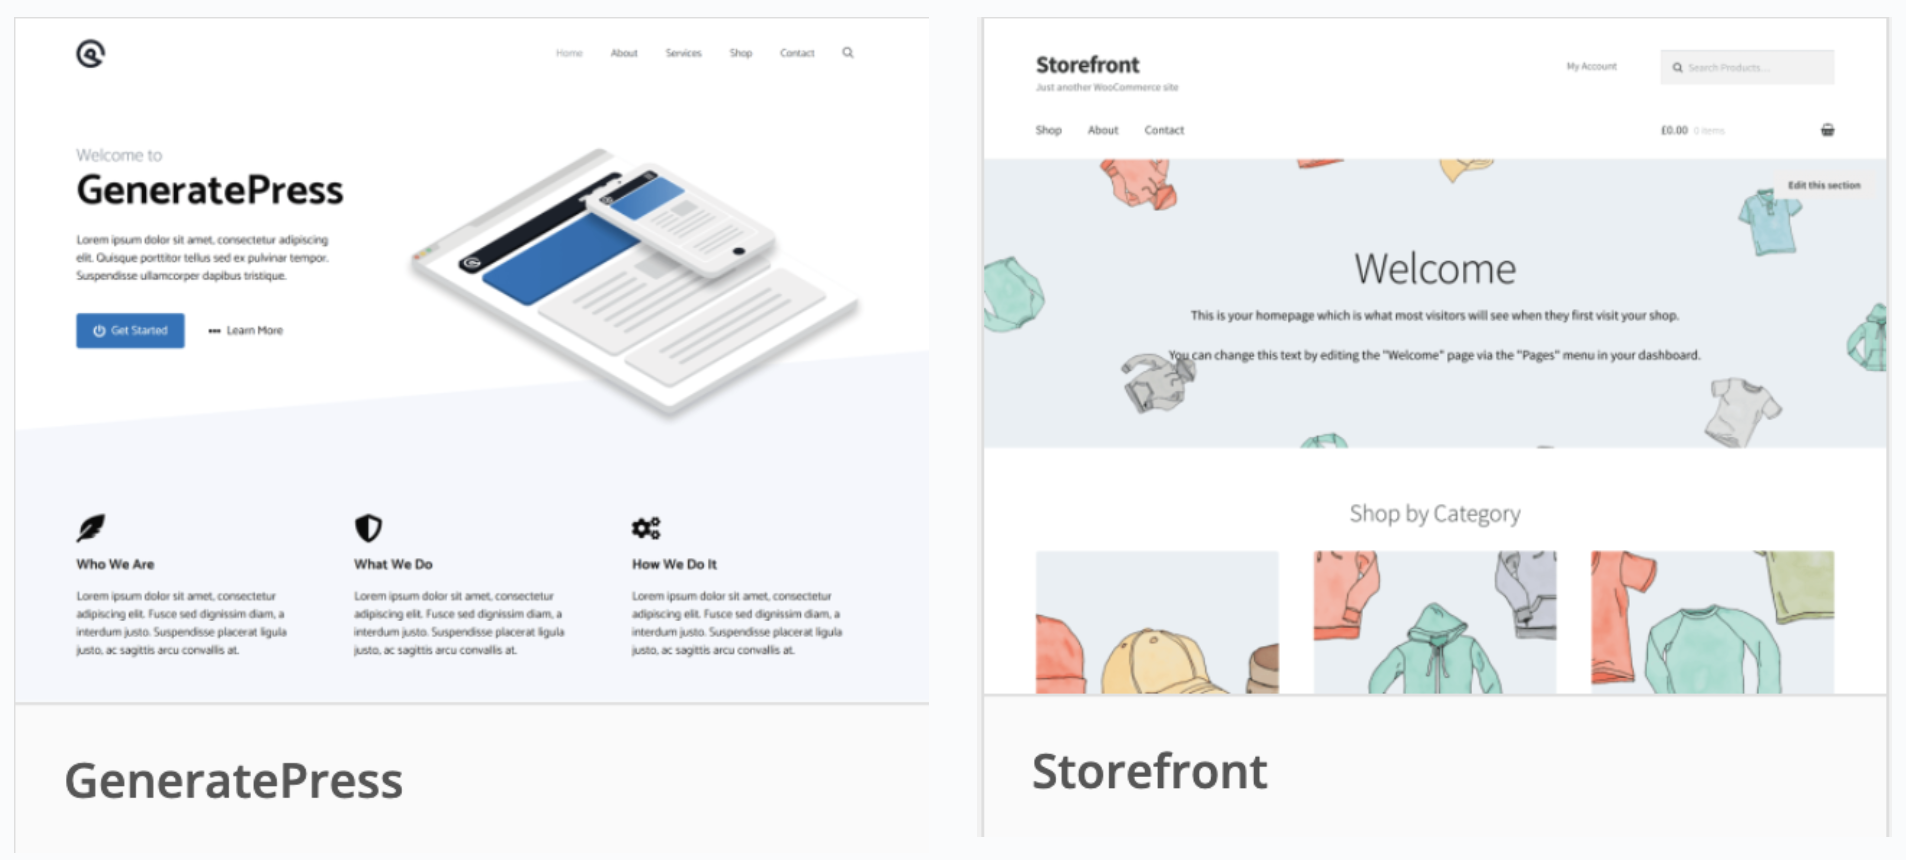 generatepress and storefront blockified themes